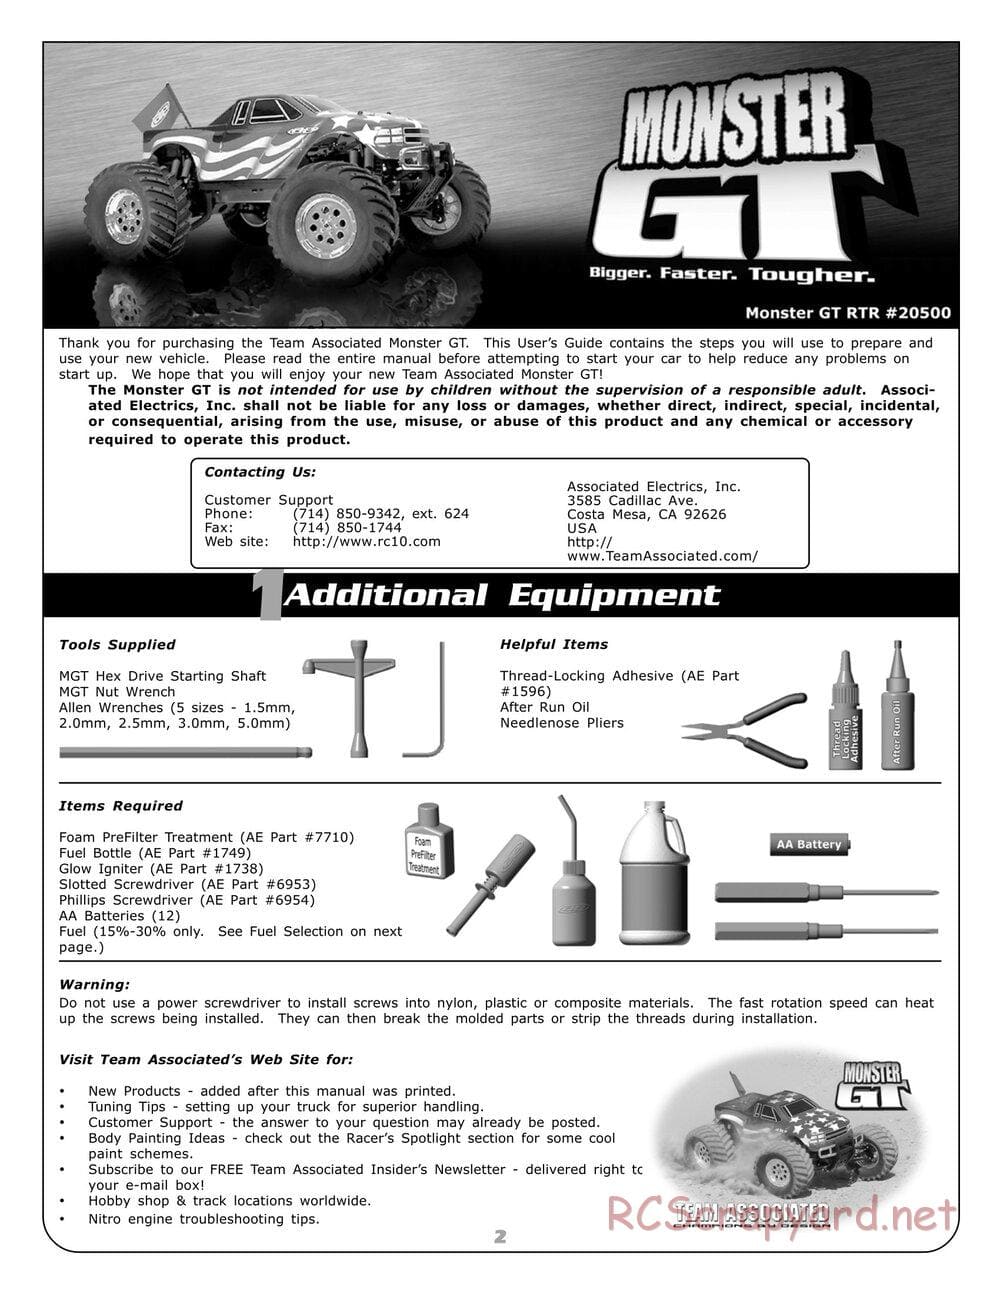 Team Associated - Monster GT - Manual - Page 2